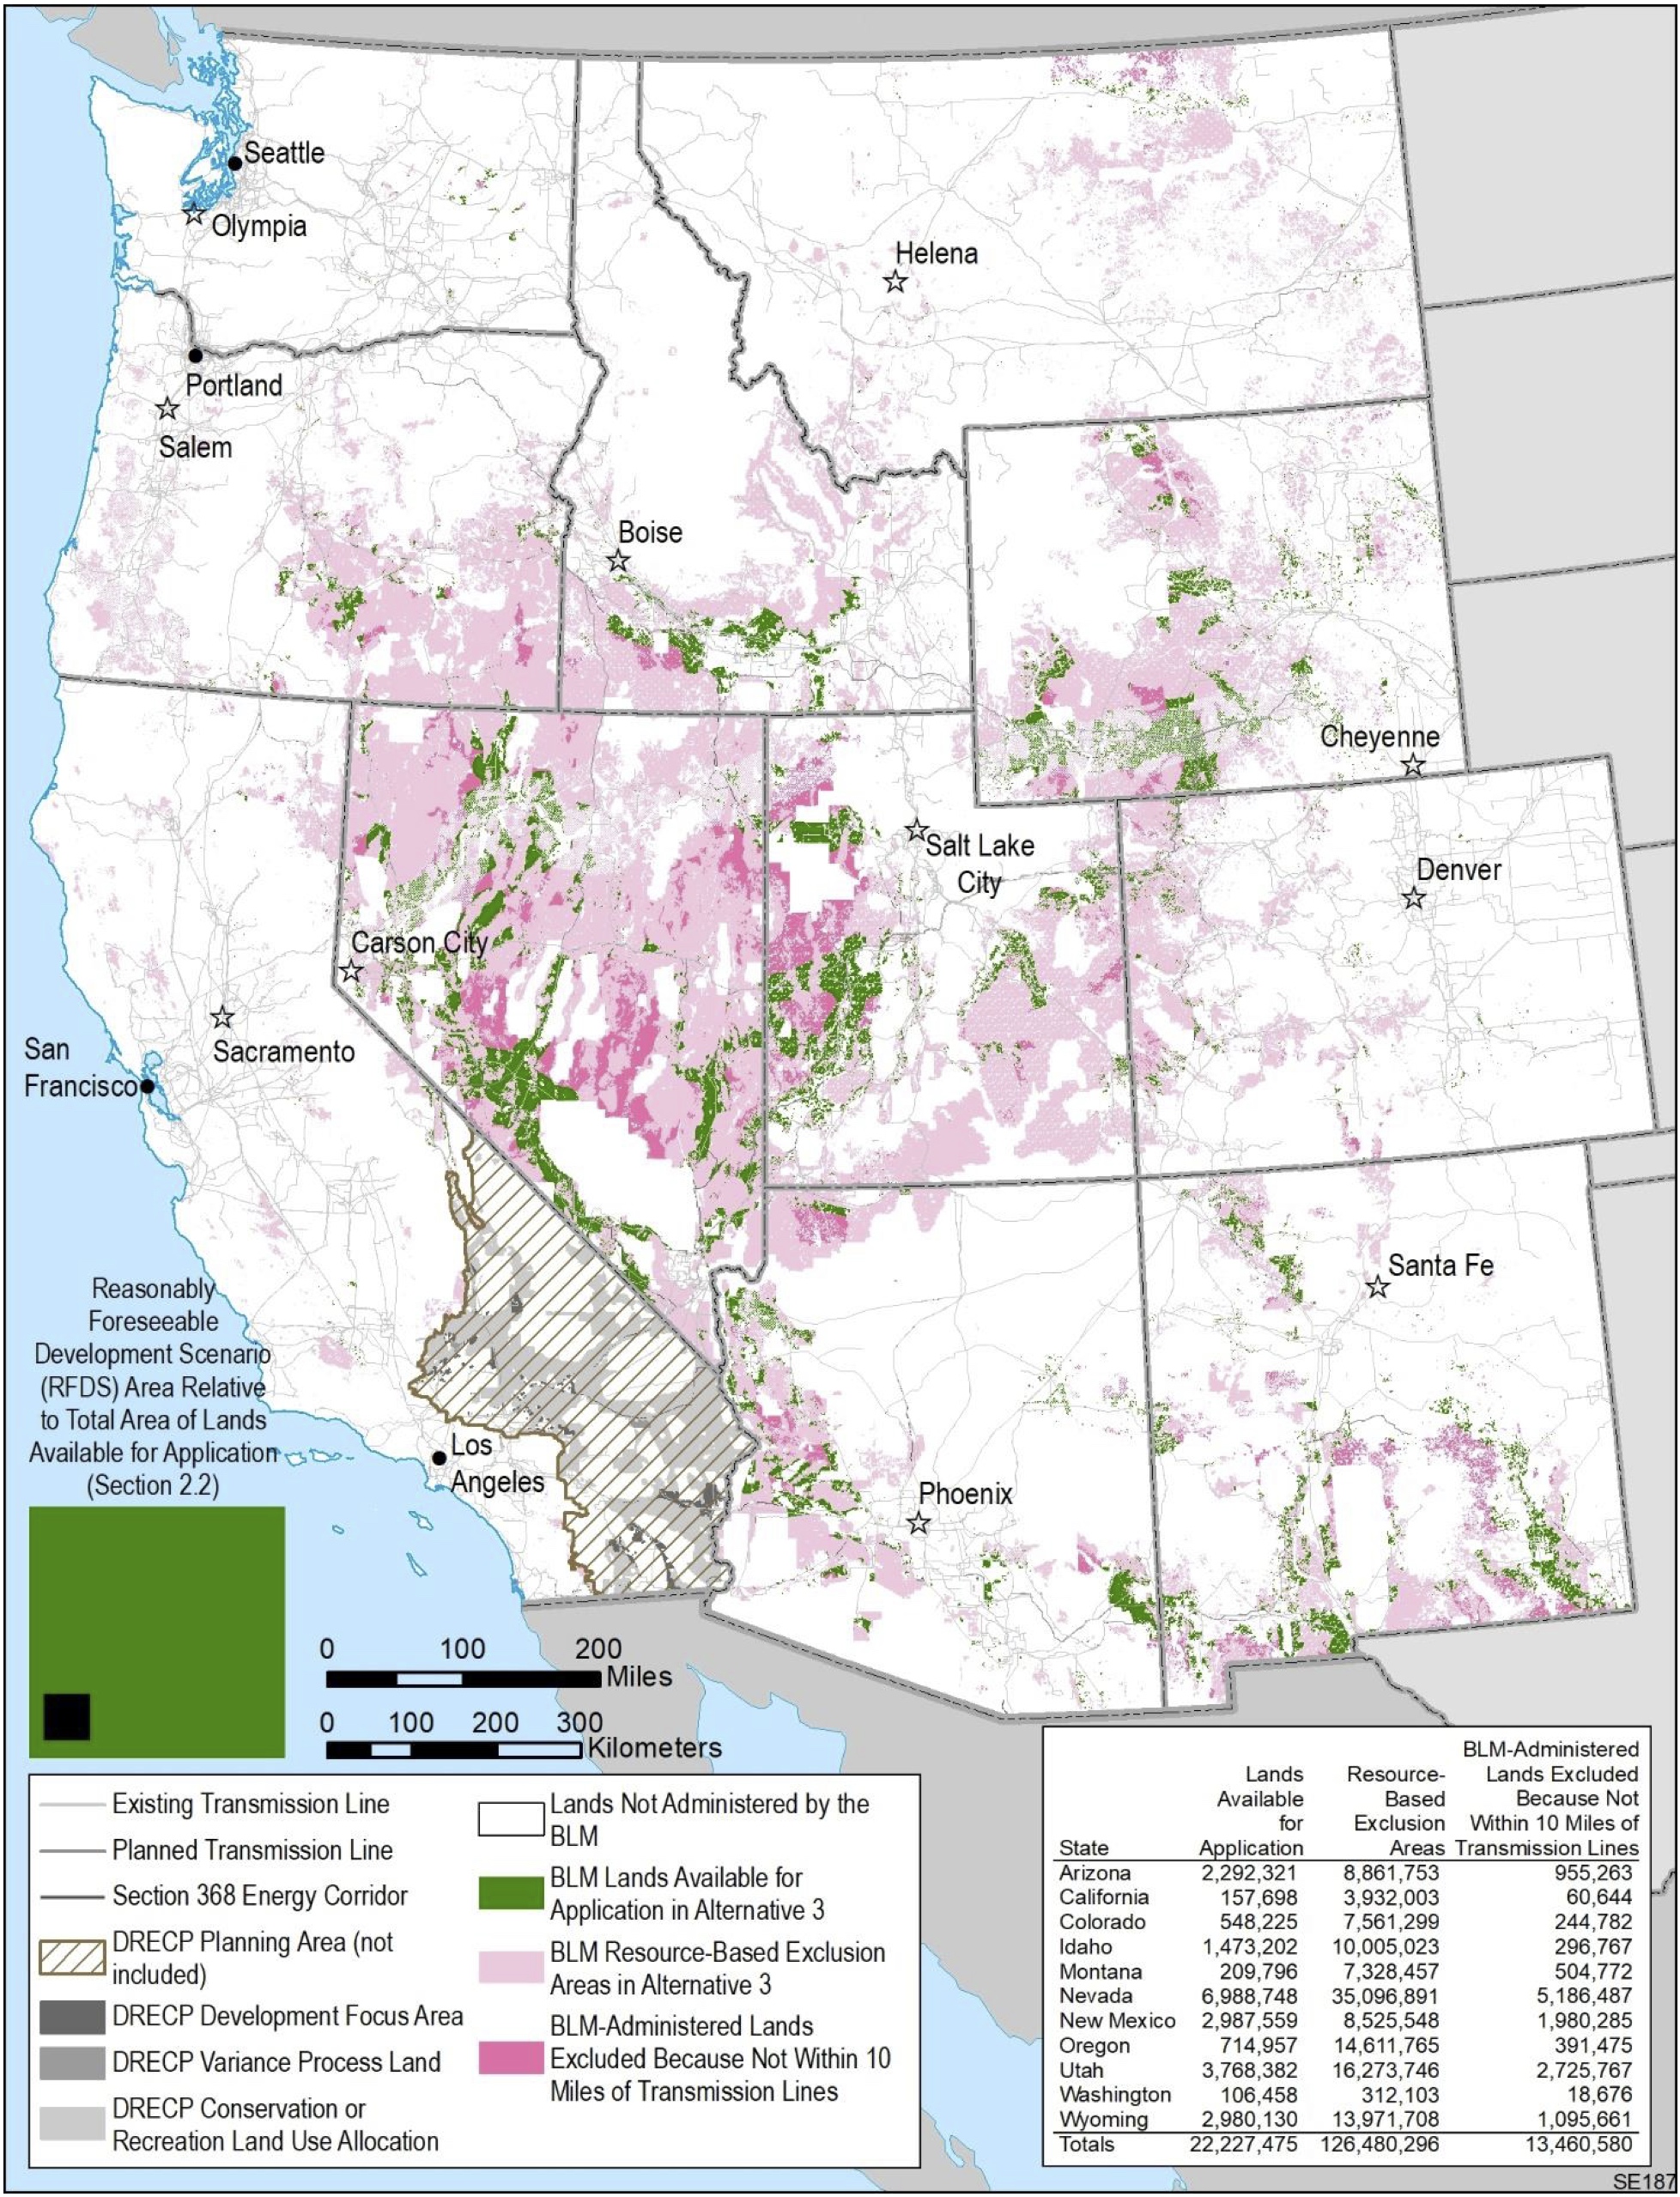 Figure ES-3. BLM-Administered Lands Excluded and Available for Application in the 11-State
Planning Area under Alternative 3